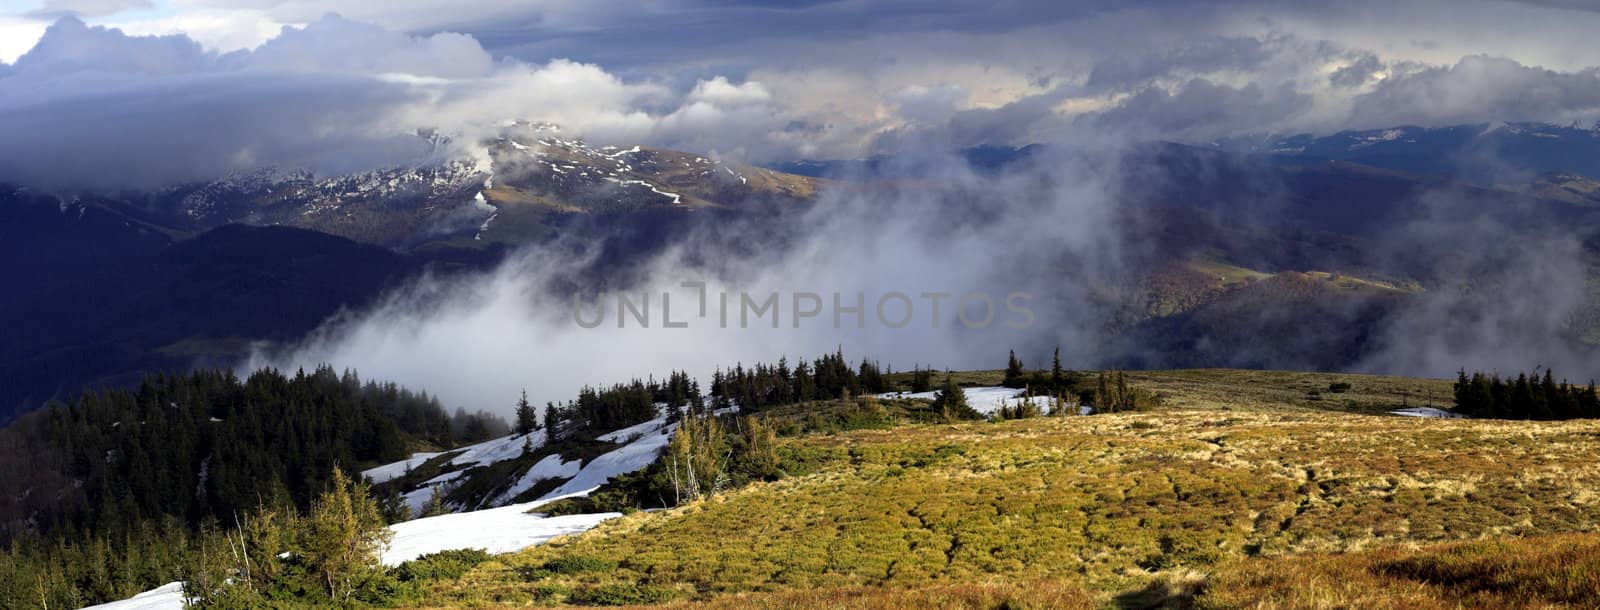 Mountain panorama with clouds by utyf